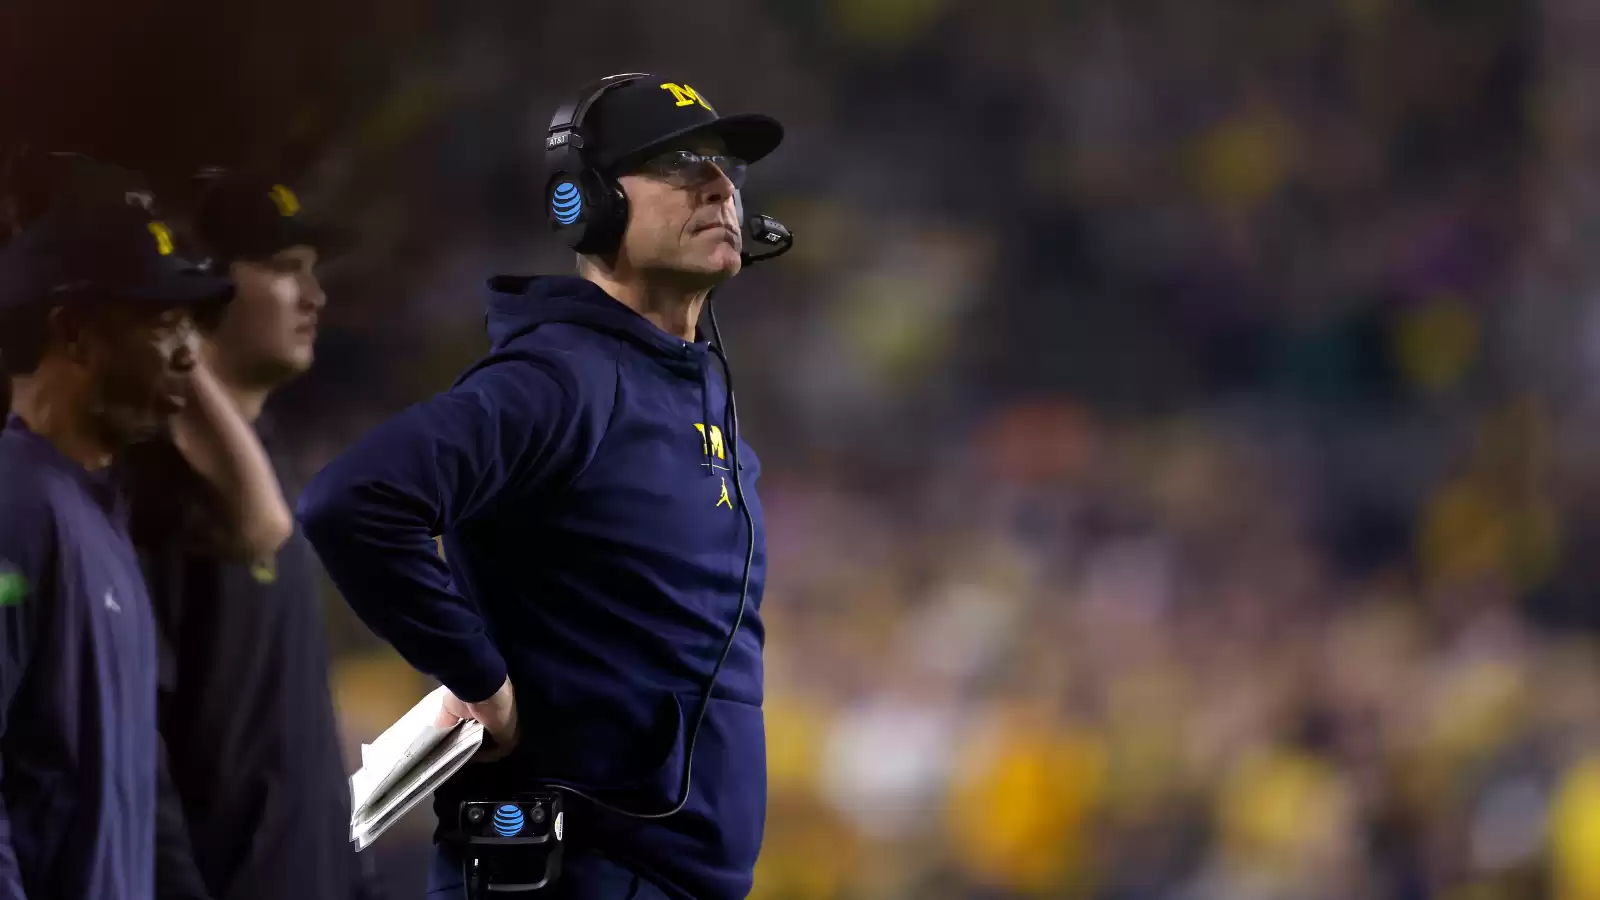 College Football World Abuzz with Reactions to Jim Harbaugh's Four-Game Suspension